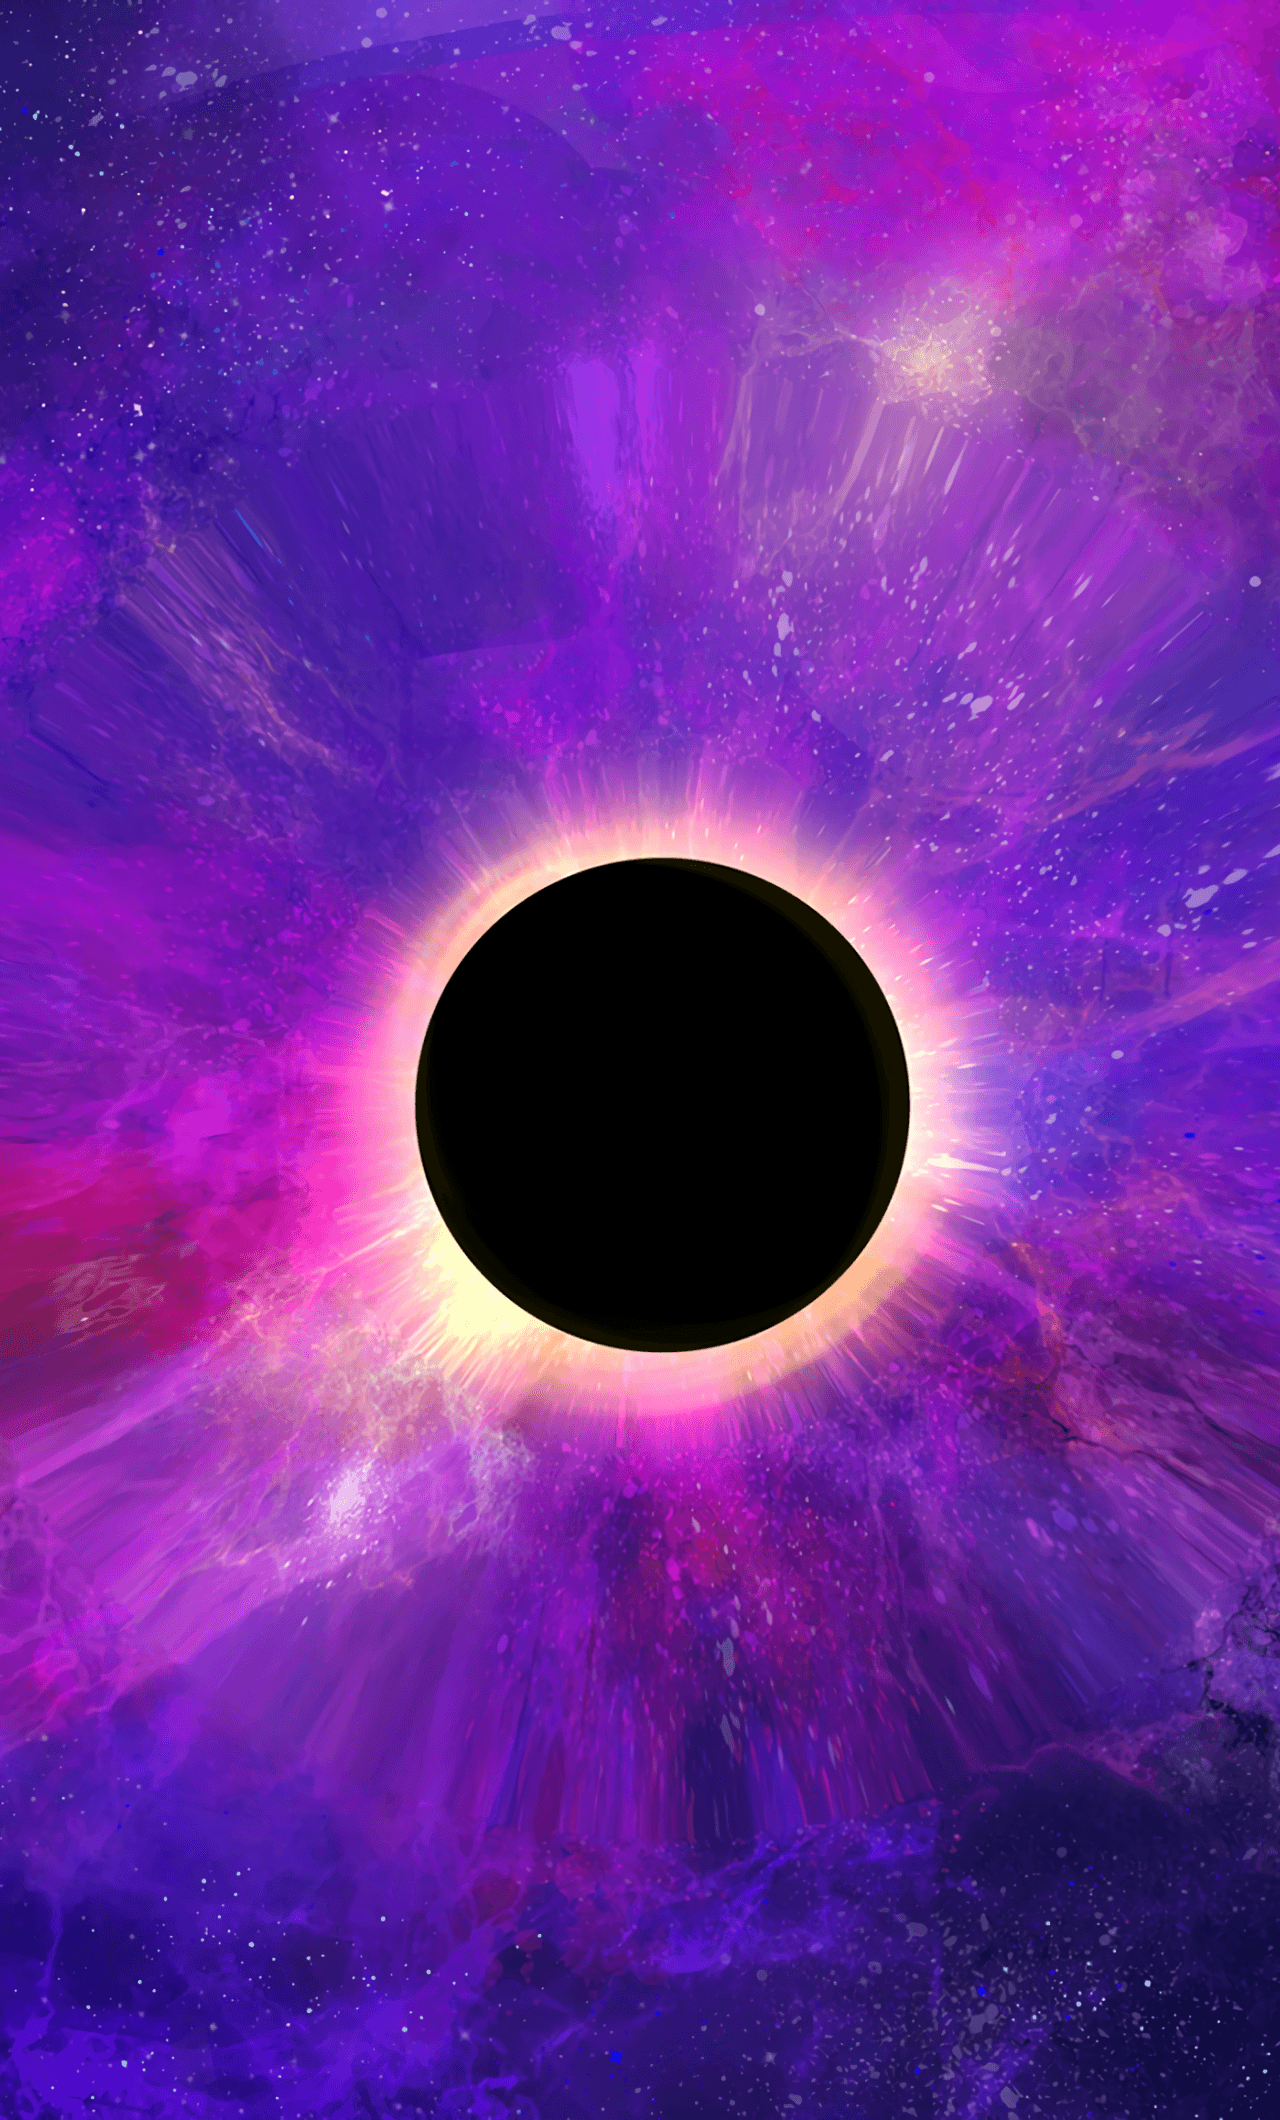 Download wallpaper 1280x2120 space, colorful, dark, black hole, planet, iphone 6 plus, 1280x2120 HD background, 16091